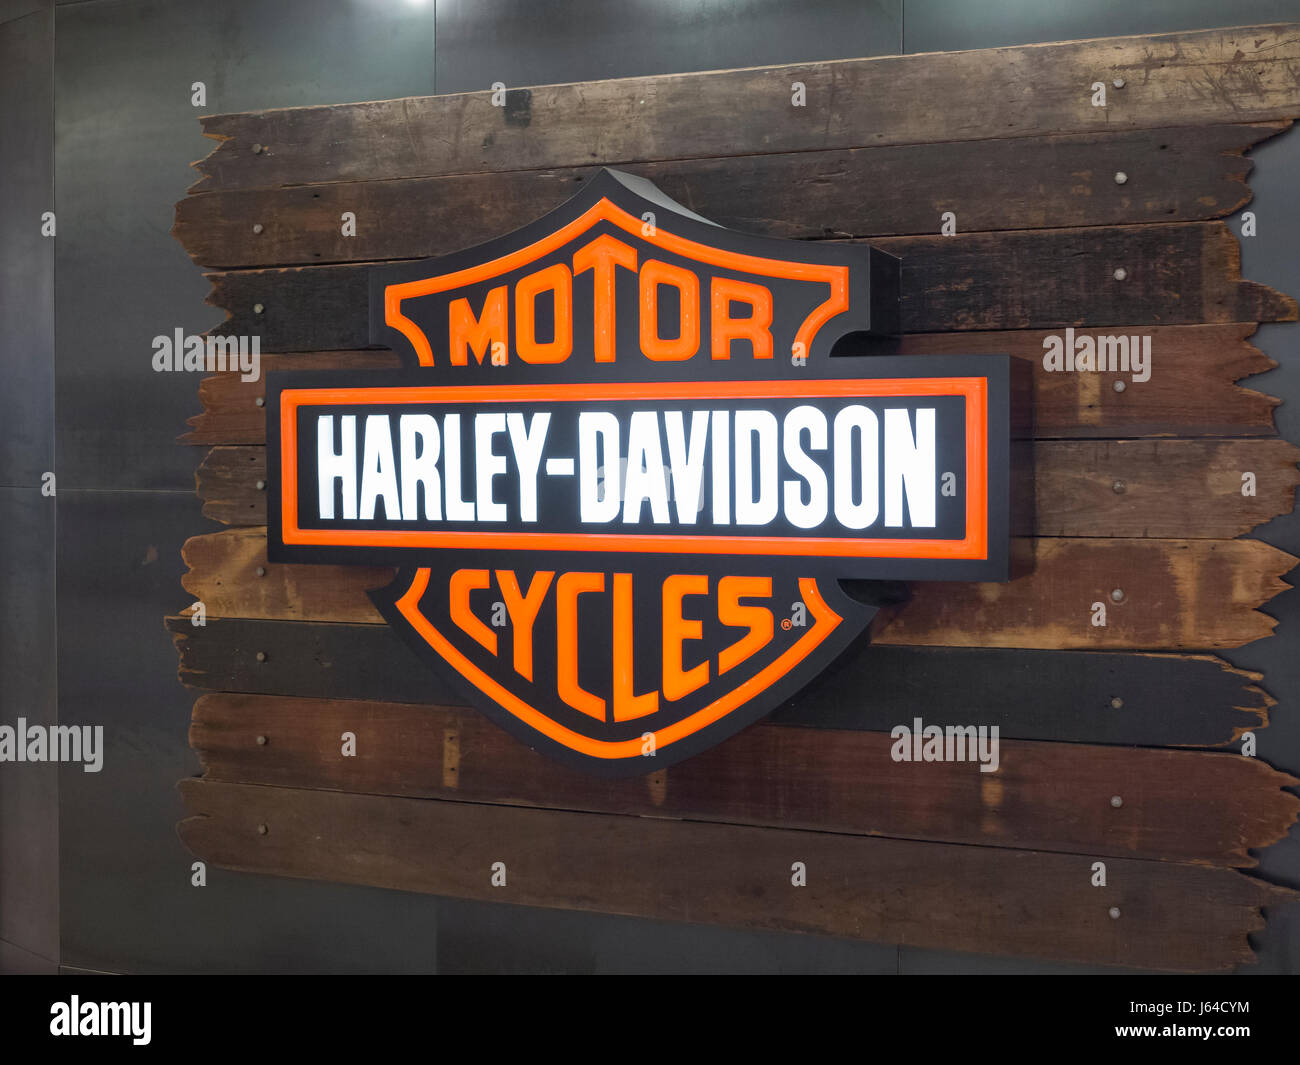 Harley Davidson Store Shop High Resolution Stock Photography And Images Alamy